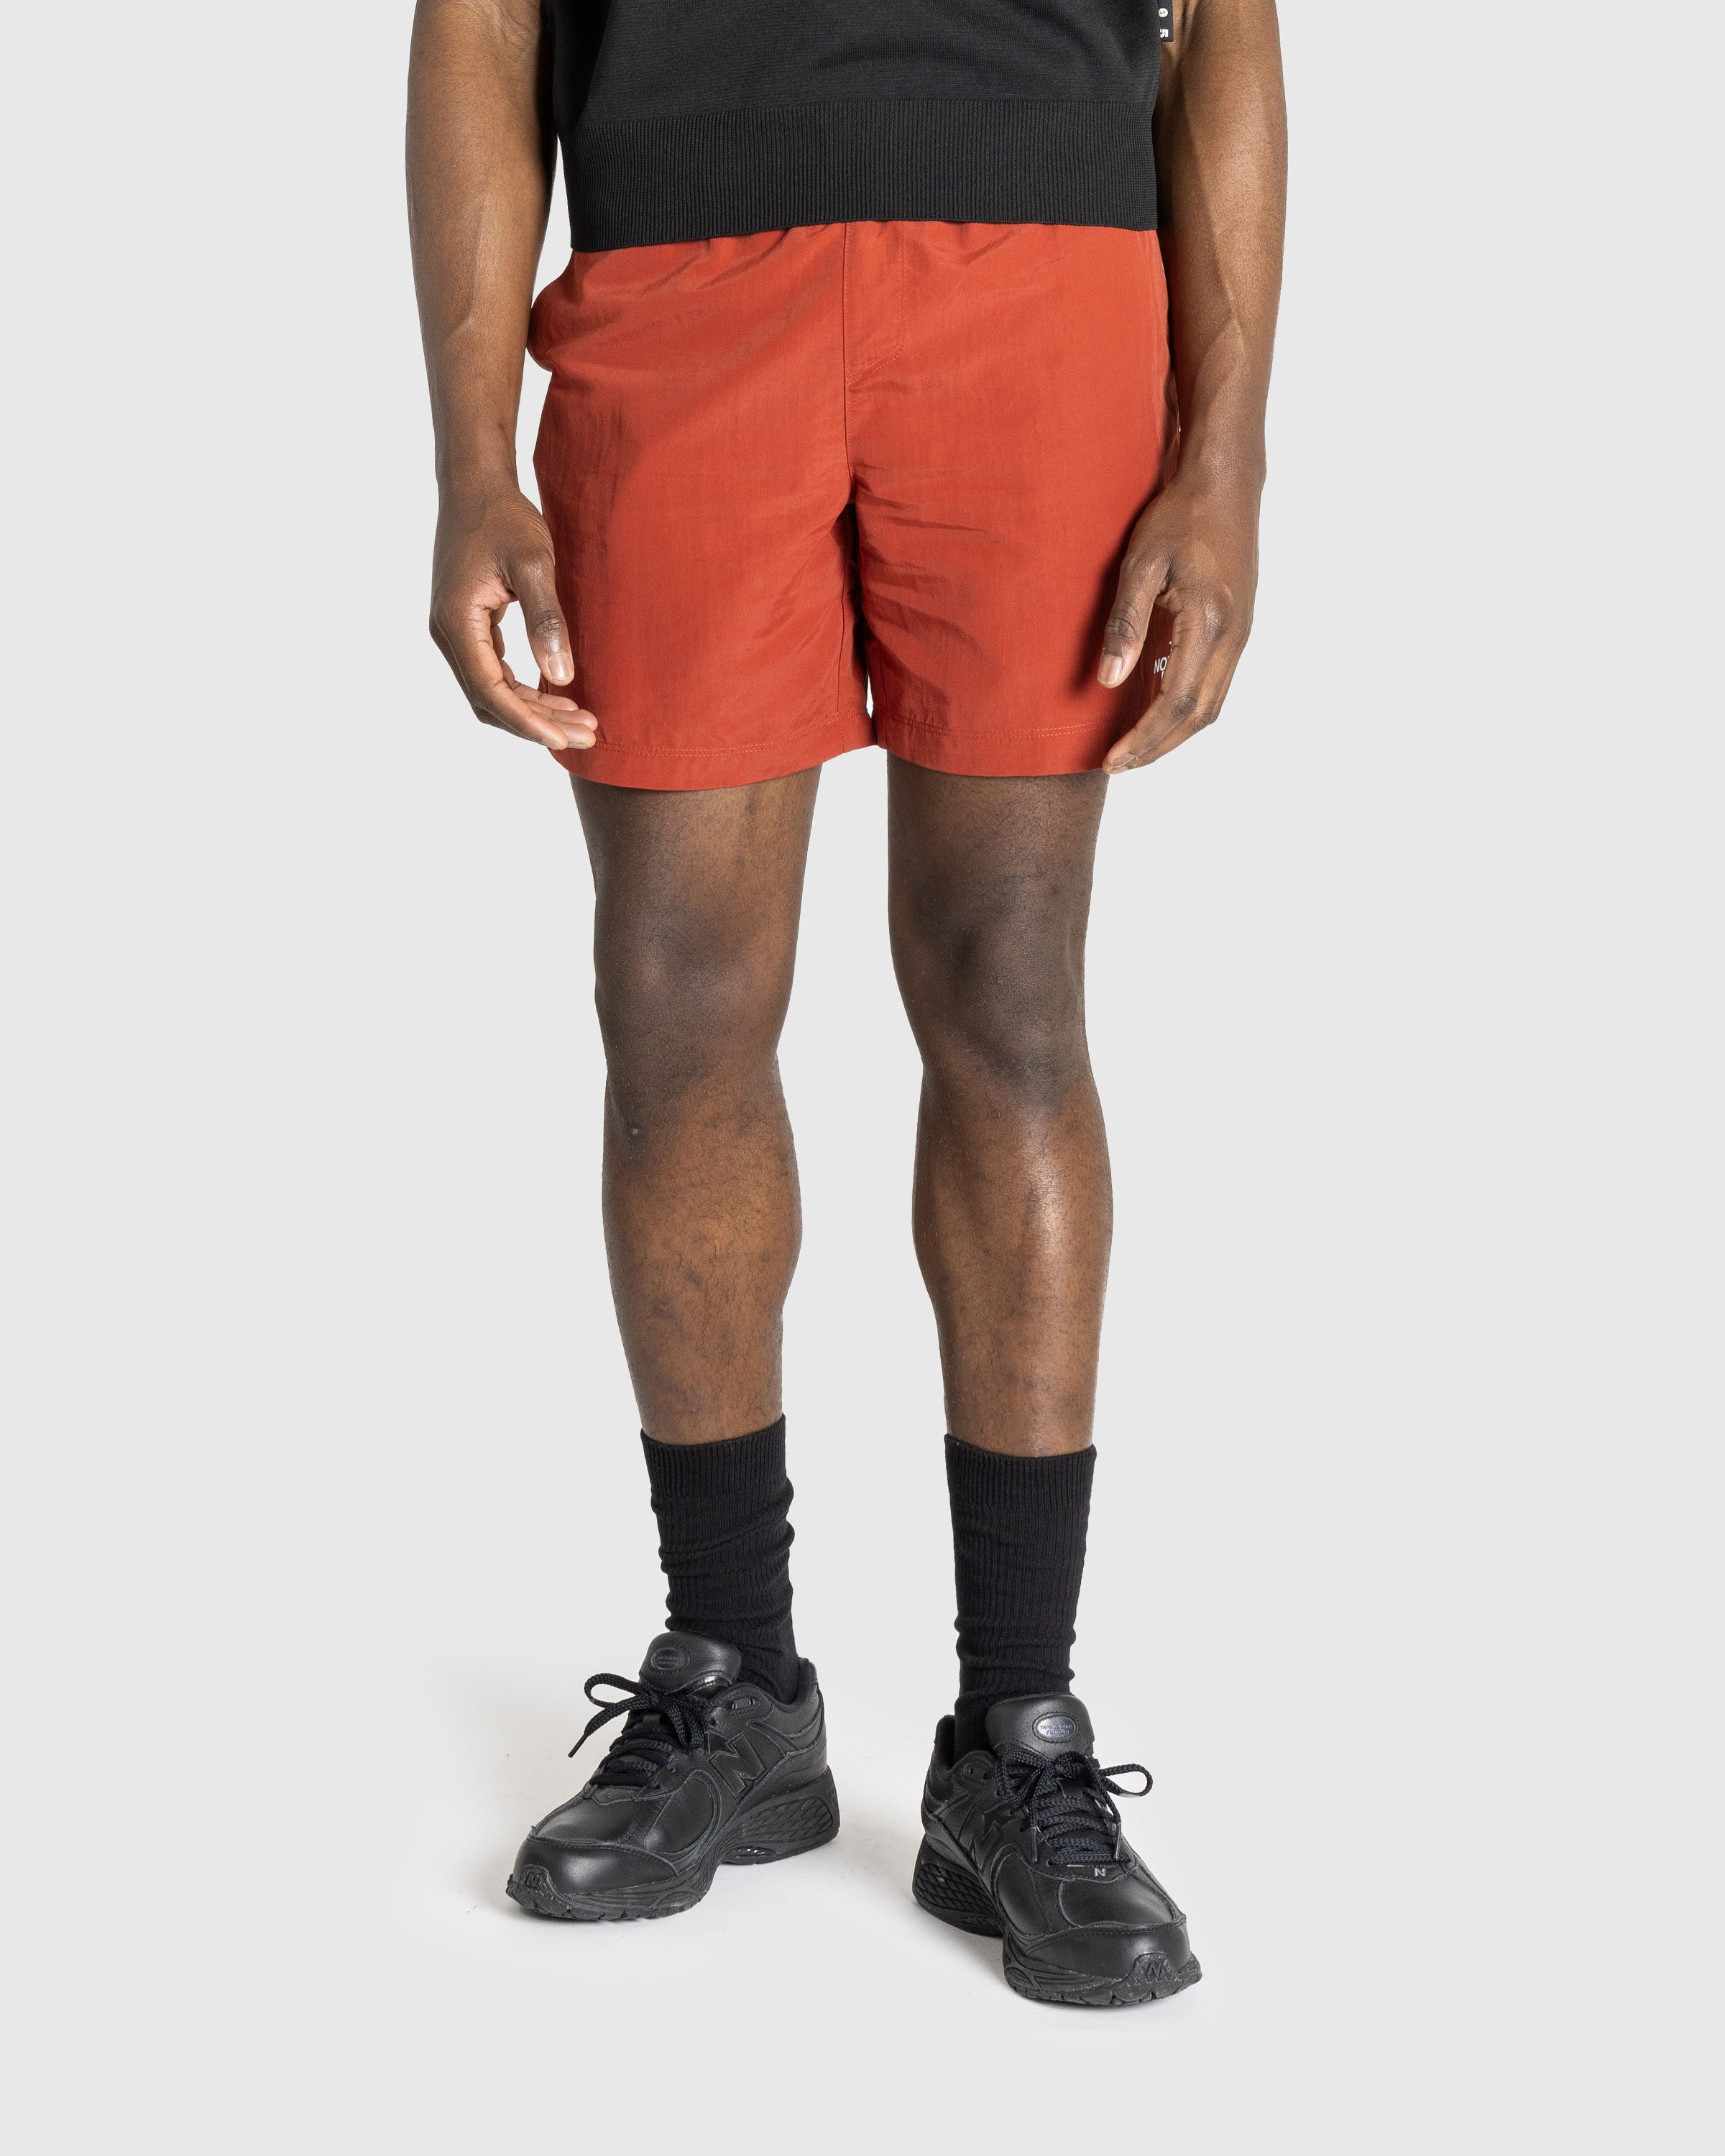 The North Face - M WATER SHORT - EU IRON RED - Clothing - Red - Image 2